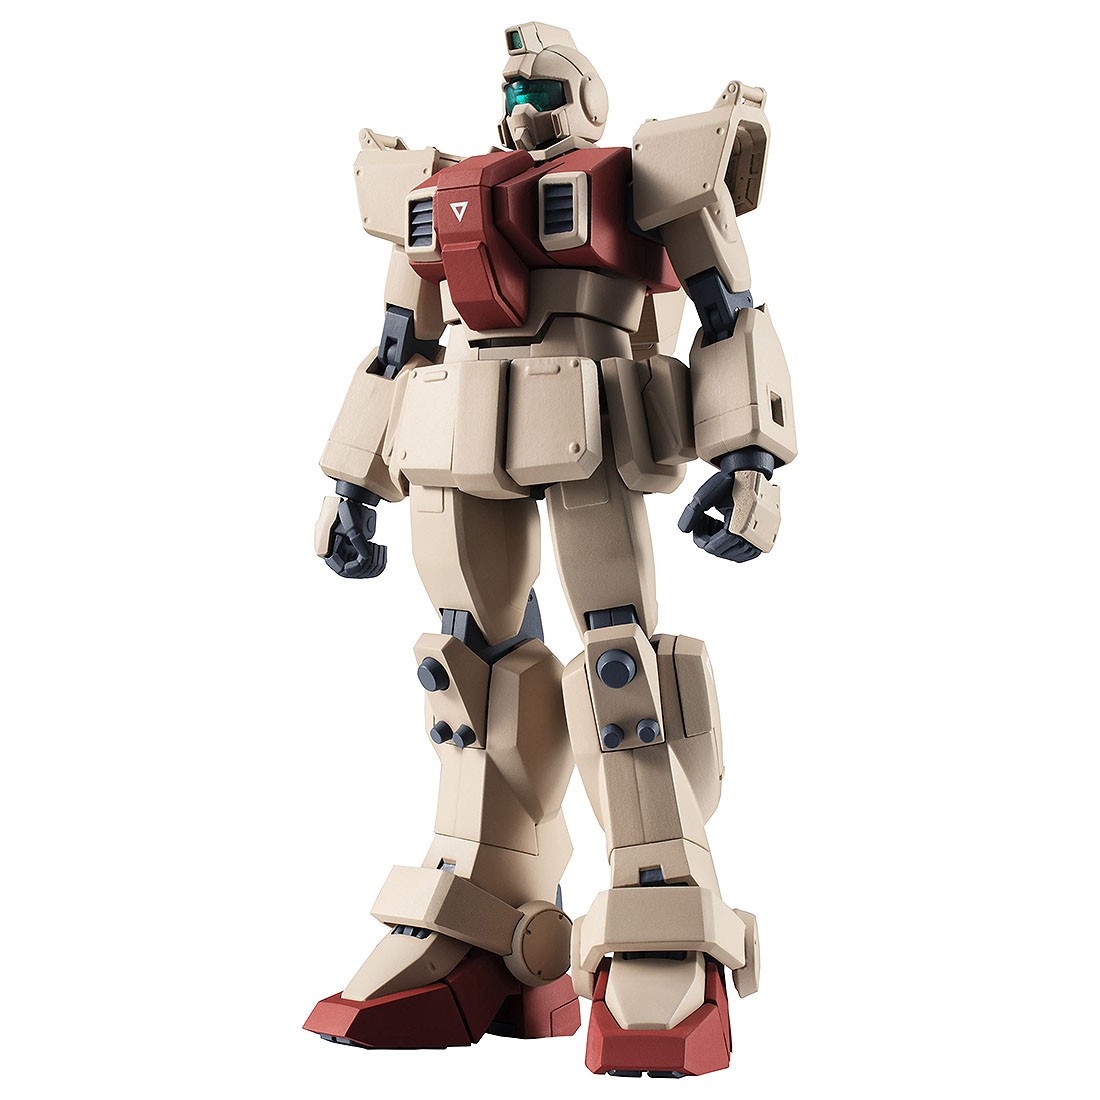 Bandai The Robot Mobile Suit Gundam The 08th MS Team Side RGM-79G GM Ground Type ver. A.N.I.M.E. Figure